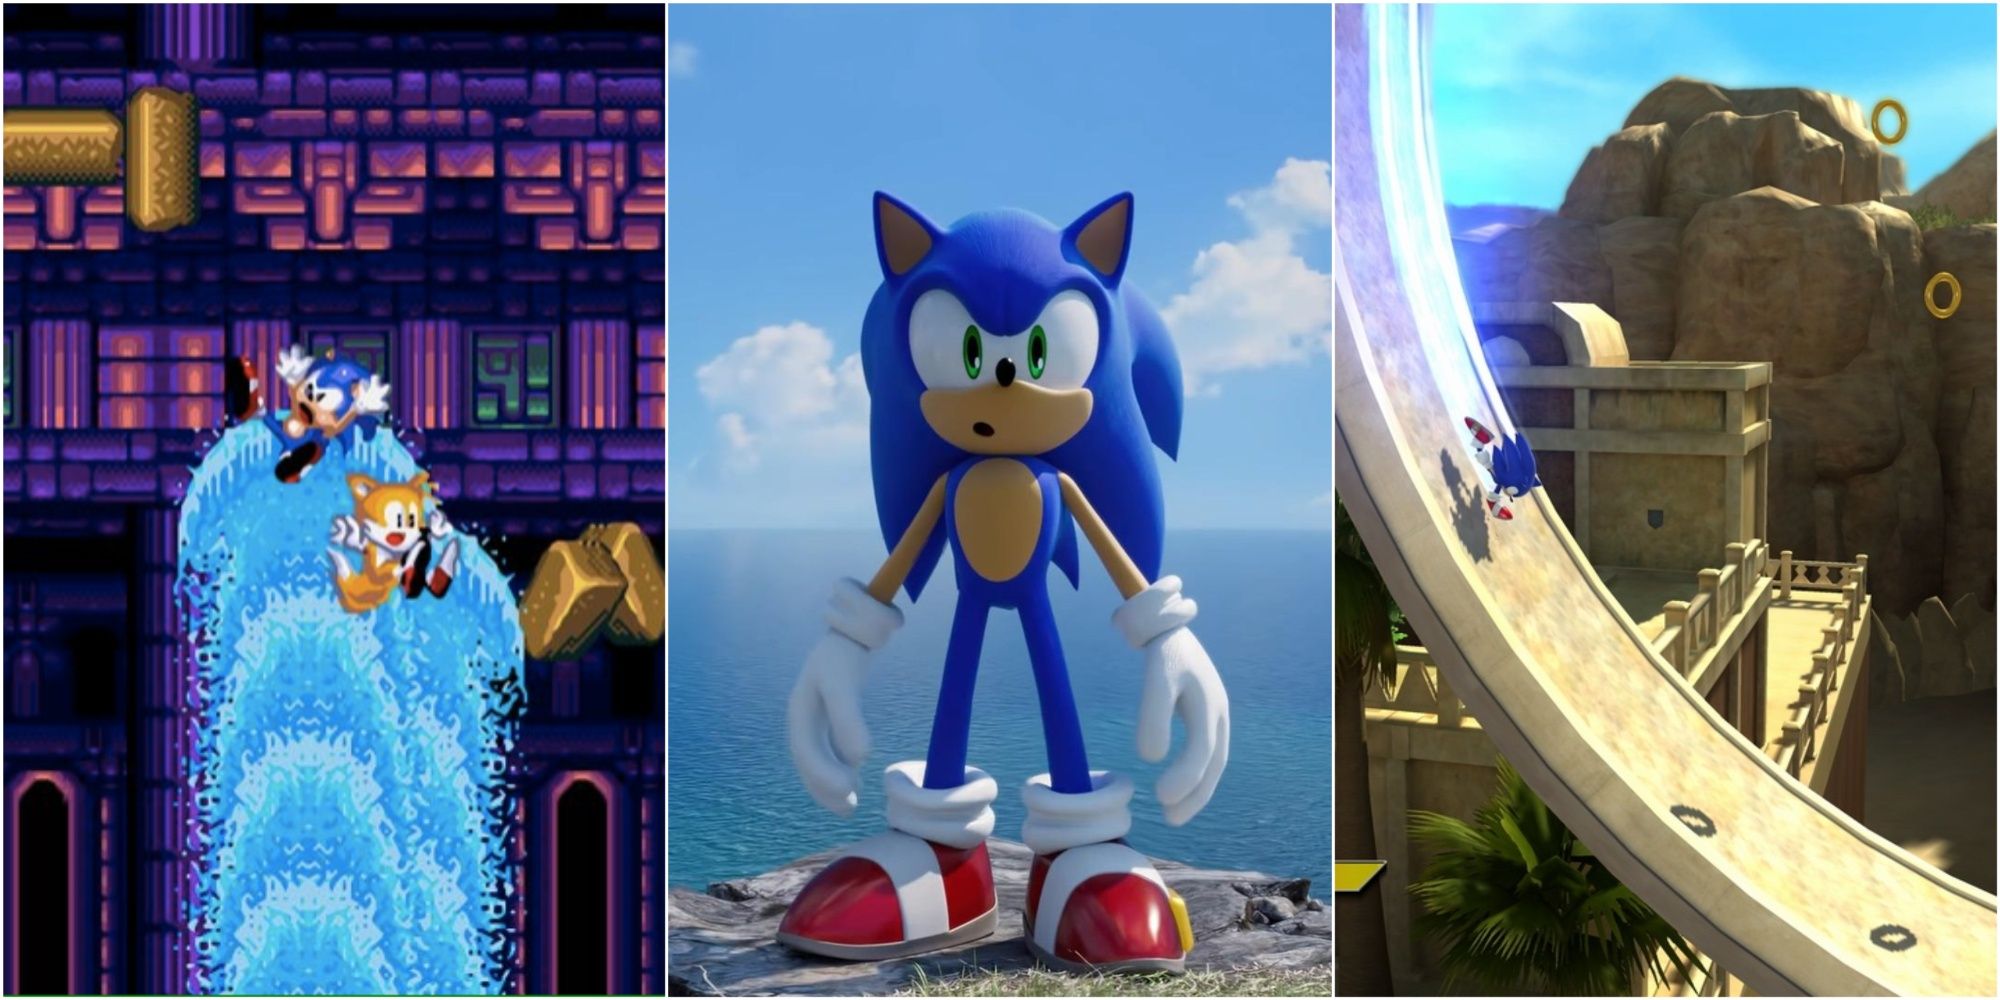 How 'Sonic the Hedgehog' overcame early design controversy for